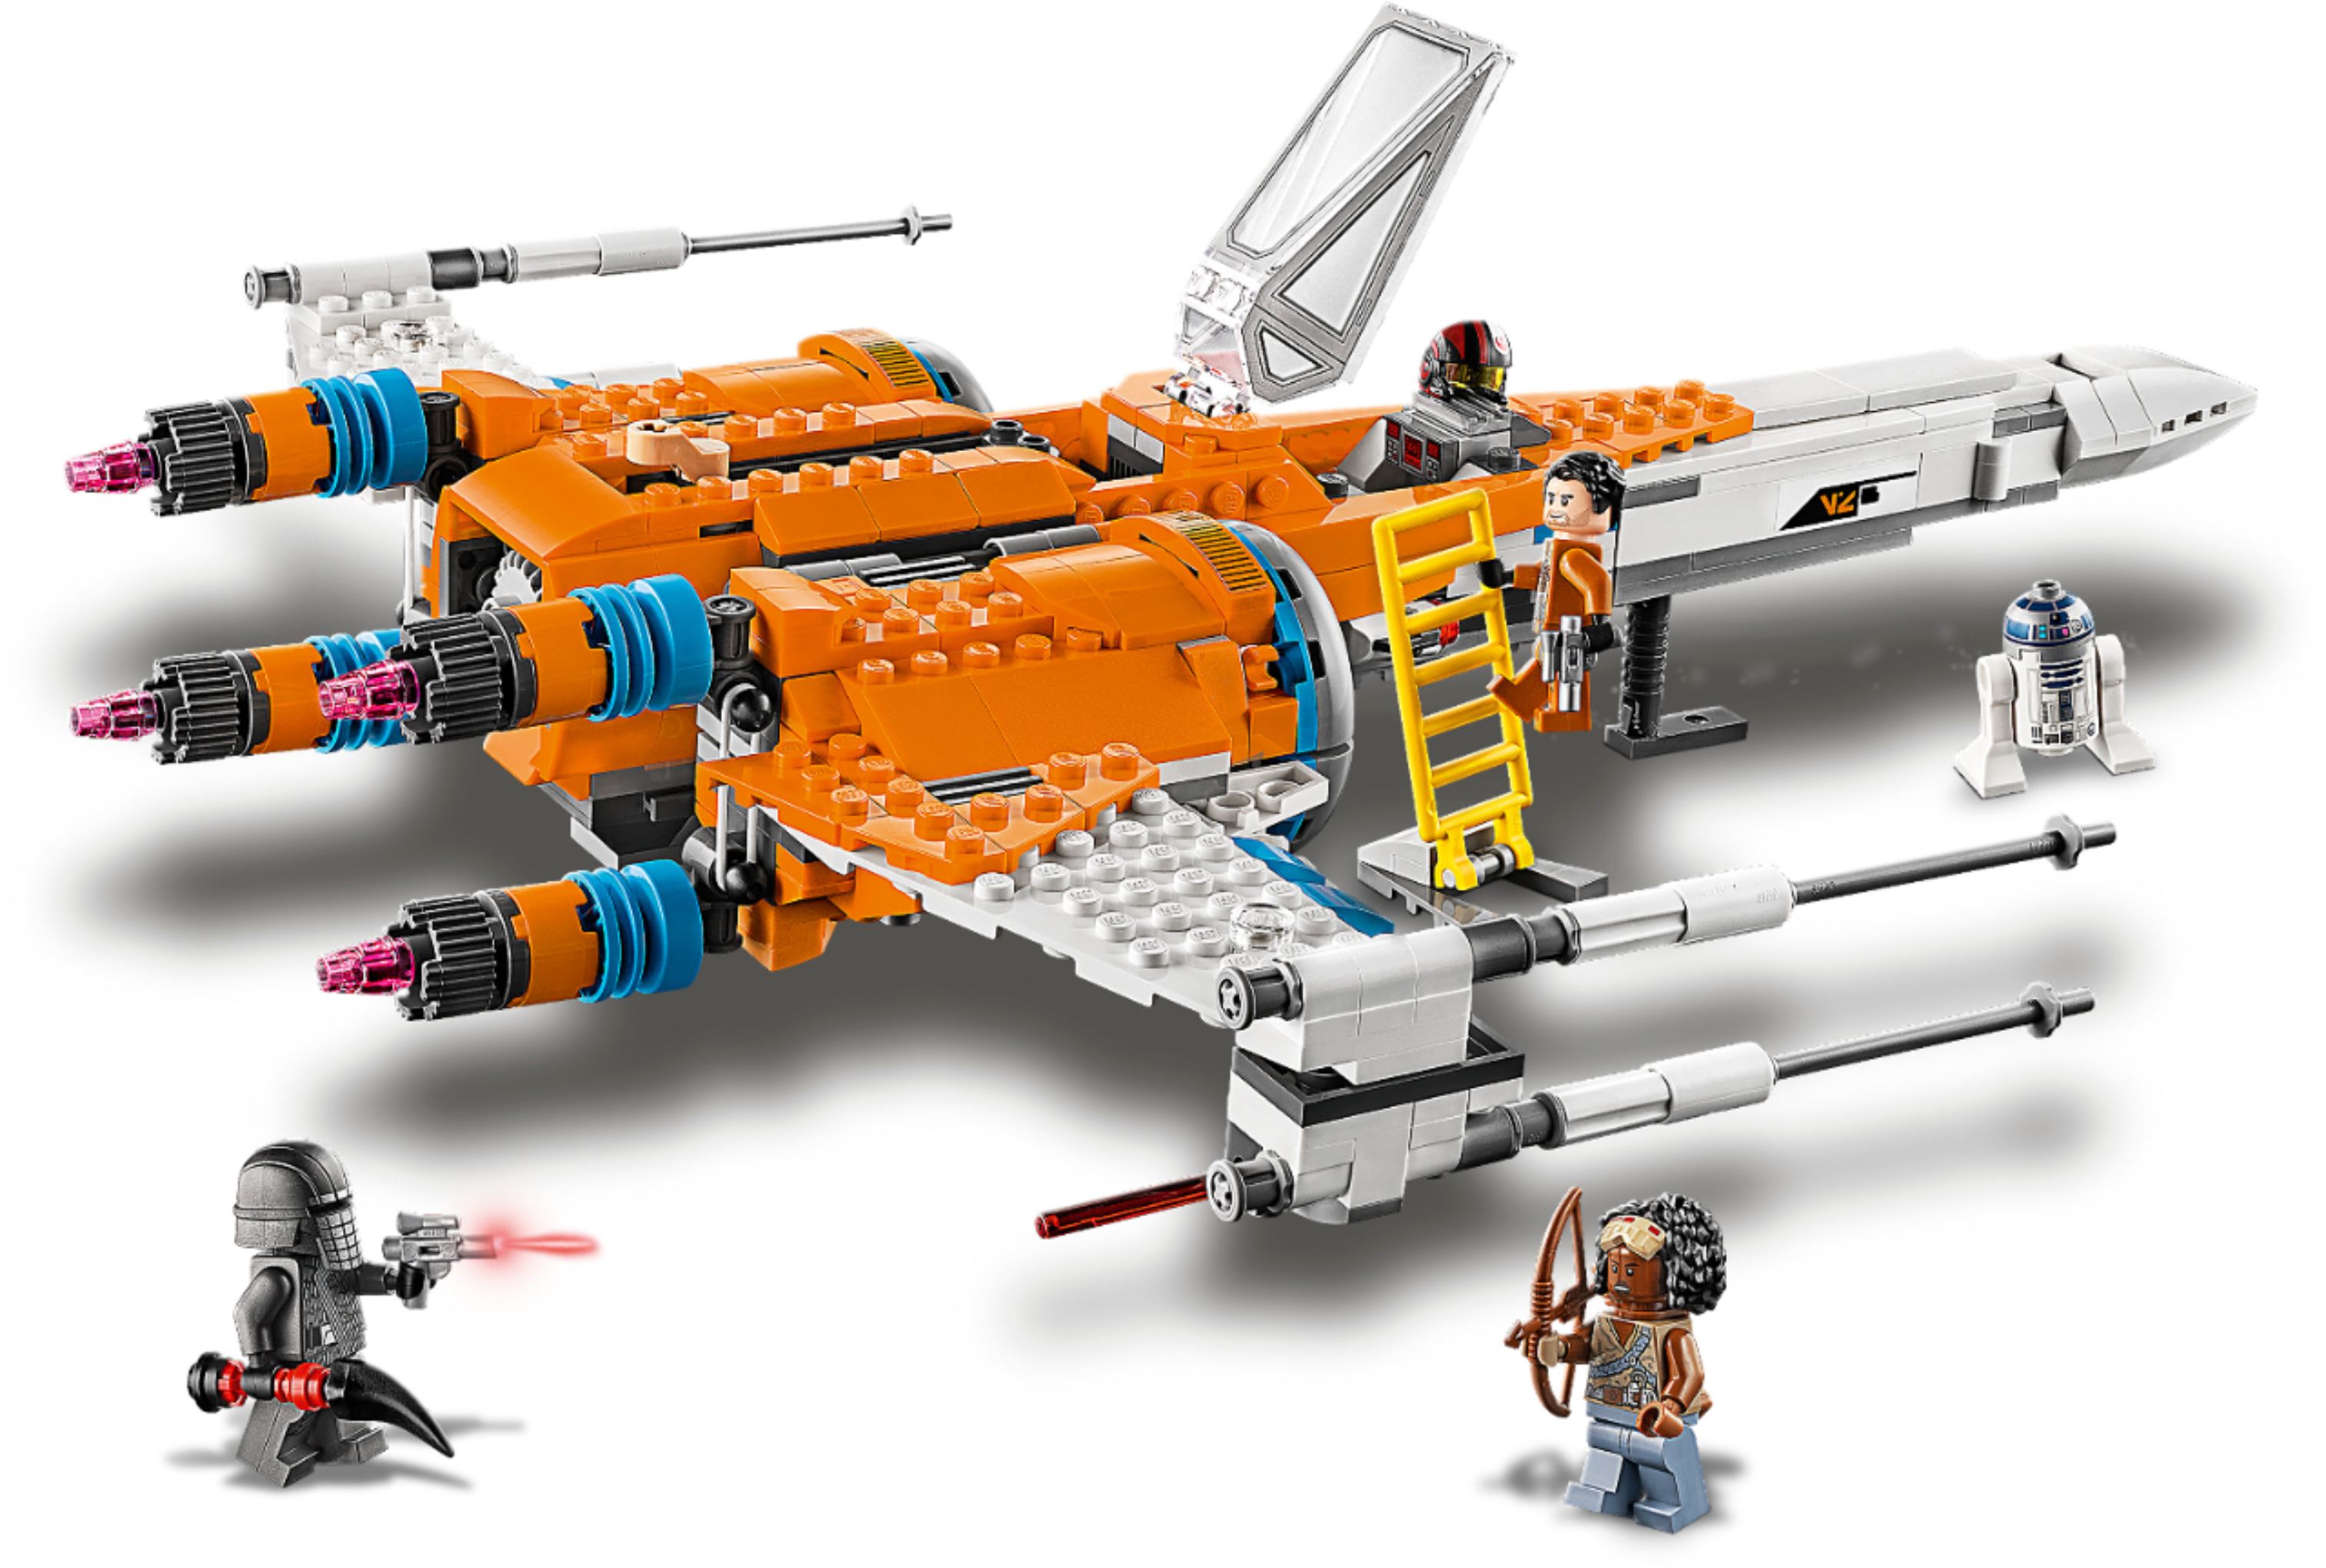 Star Wars' X-Wing Fighter LEGO set is 35% off on